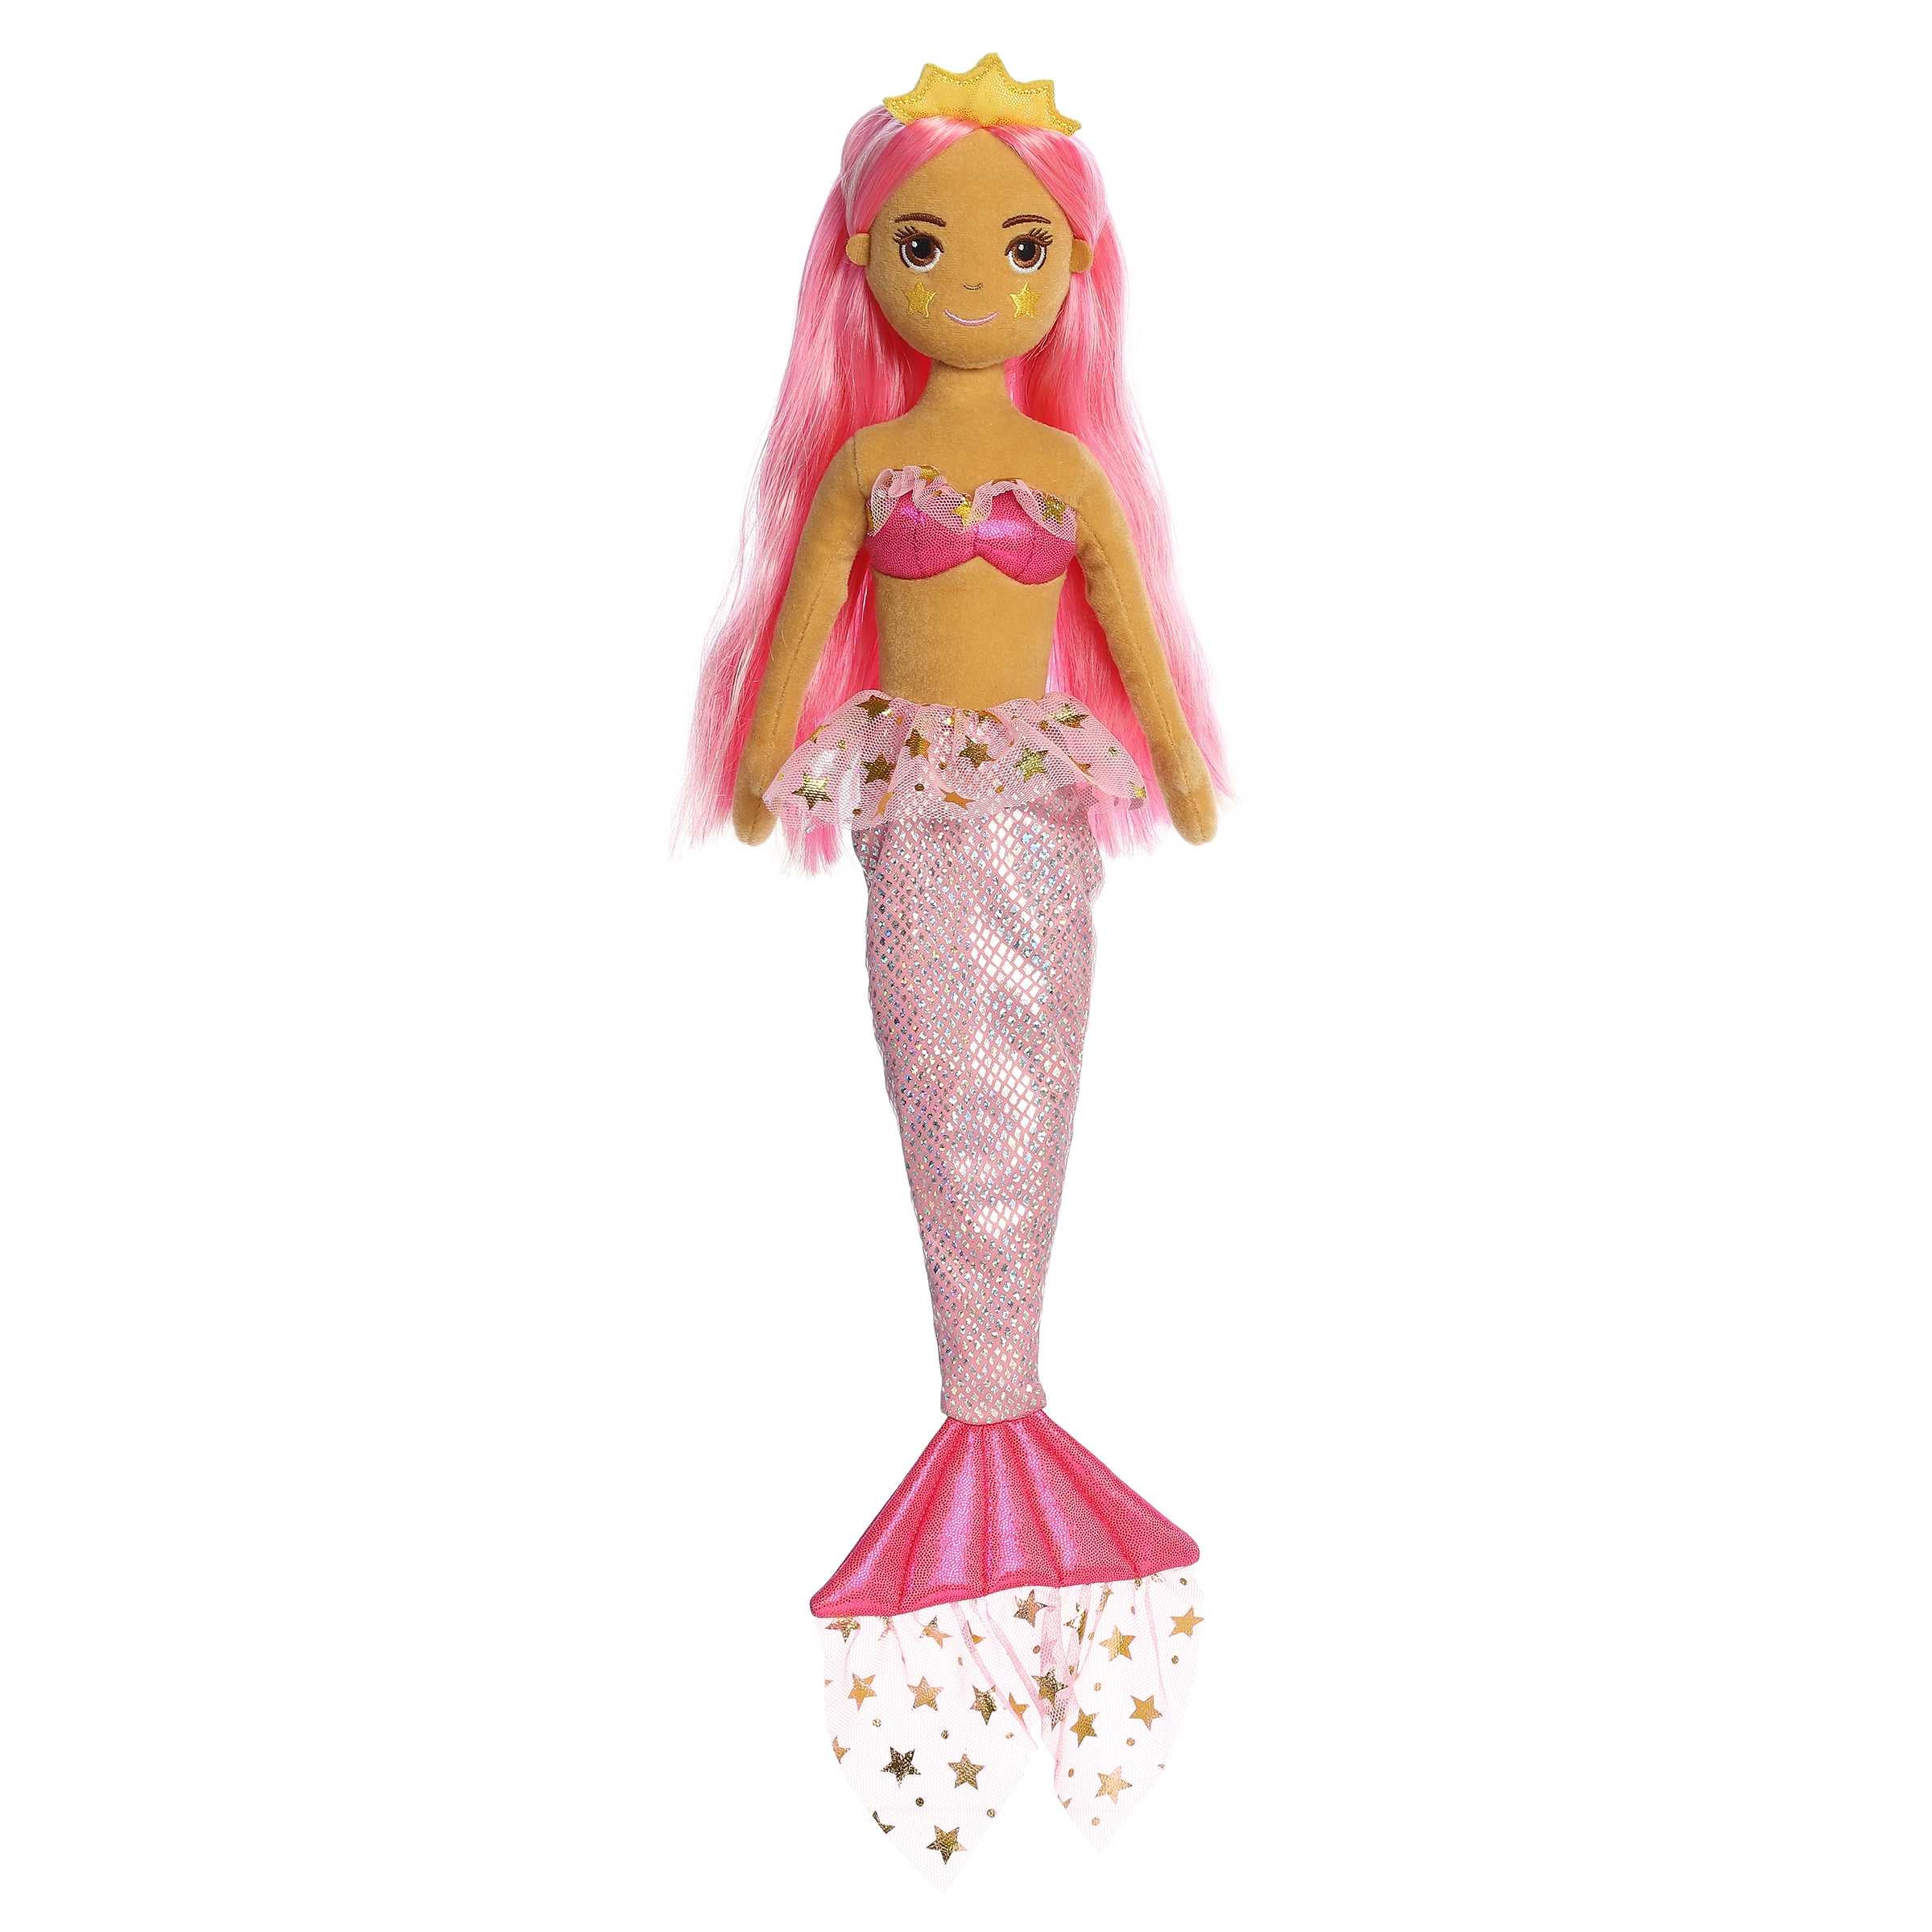 Pink mermaid plush Sunny Shine, with a glittery tail and star details, perfect for play and brightening decor.